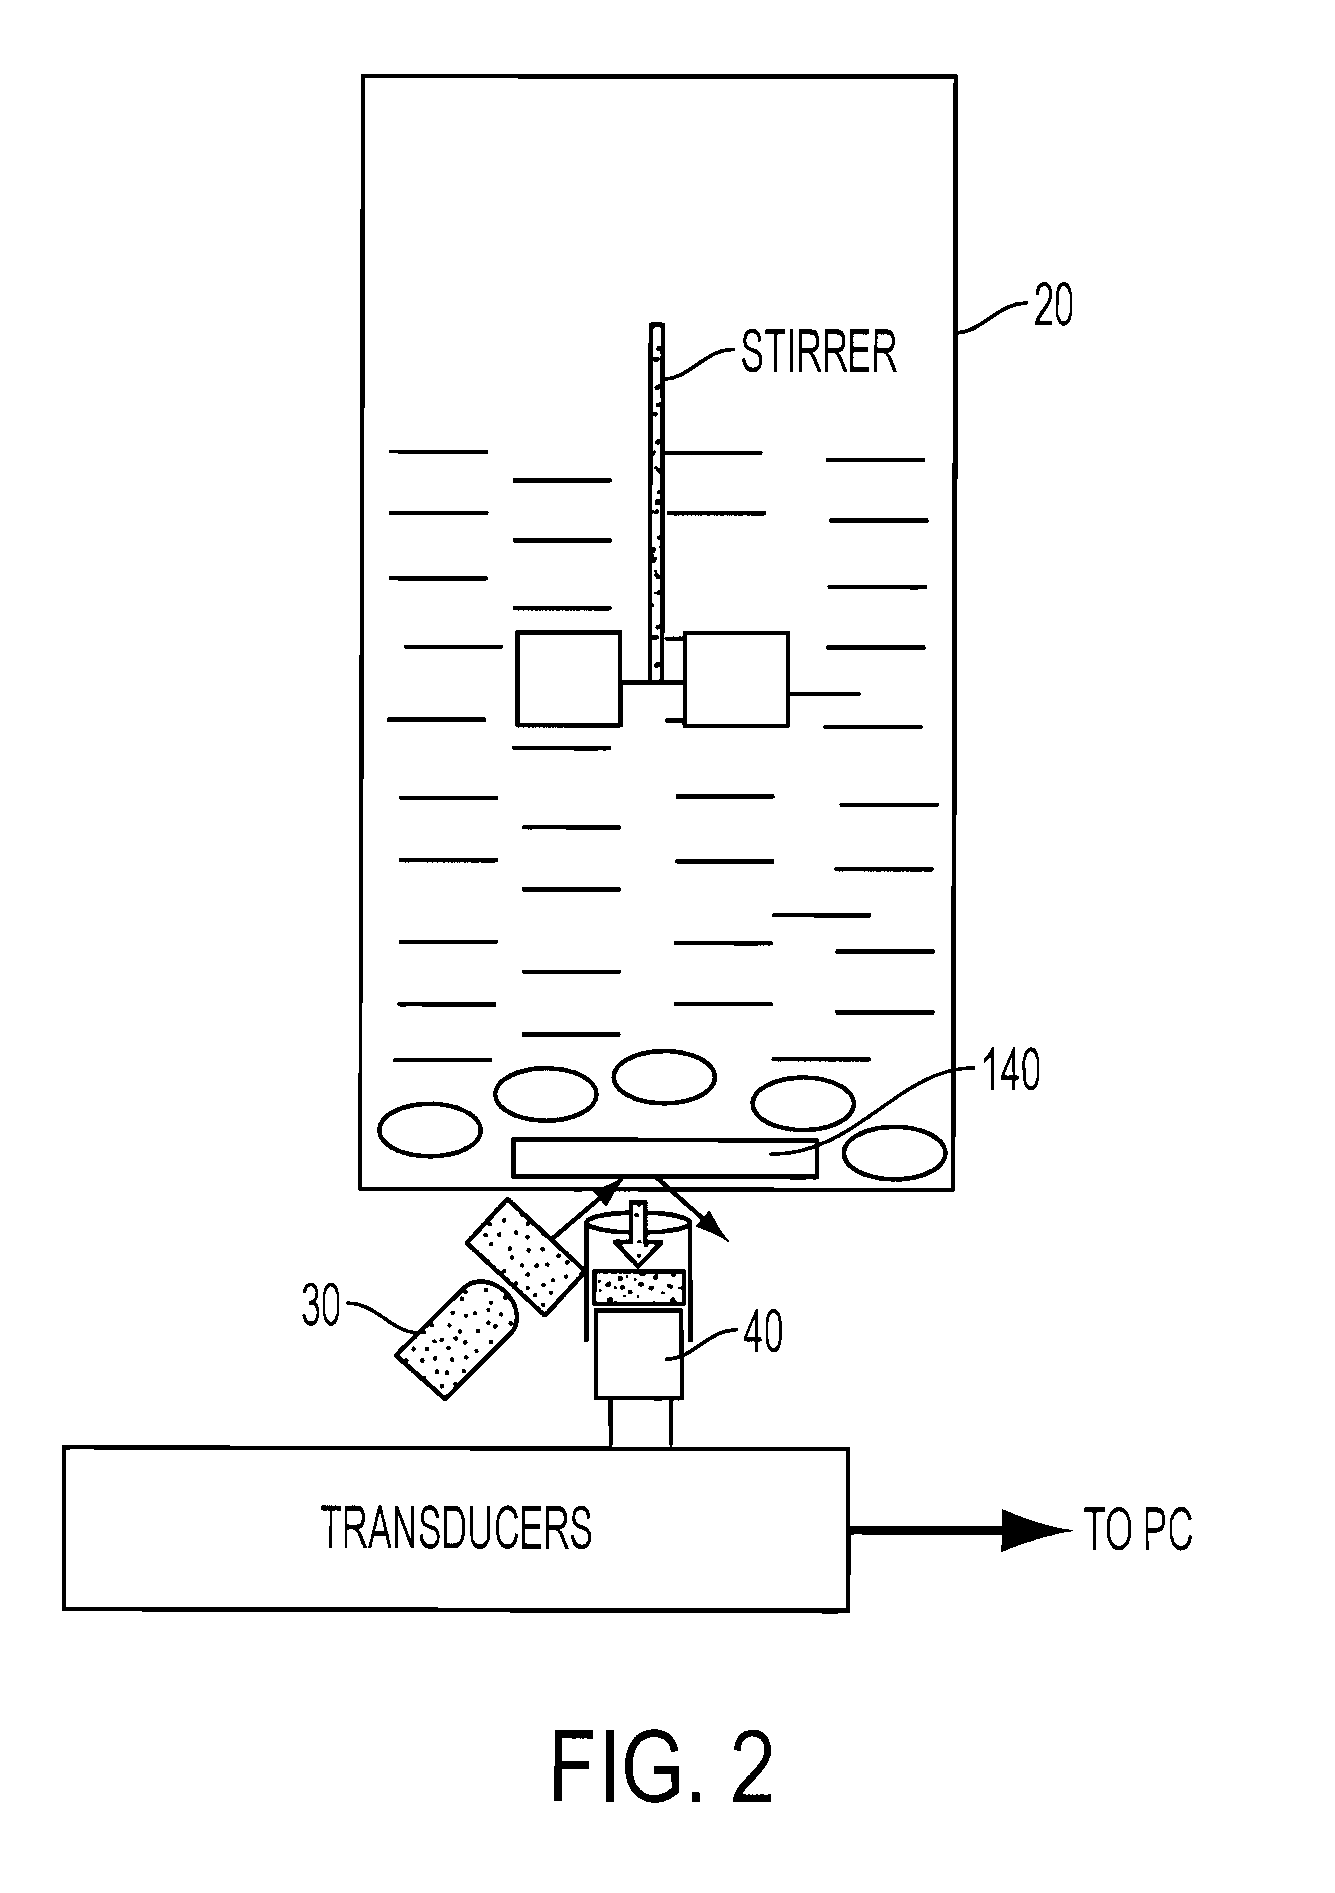 Integrated oxygen measurement and control for static culture vessels